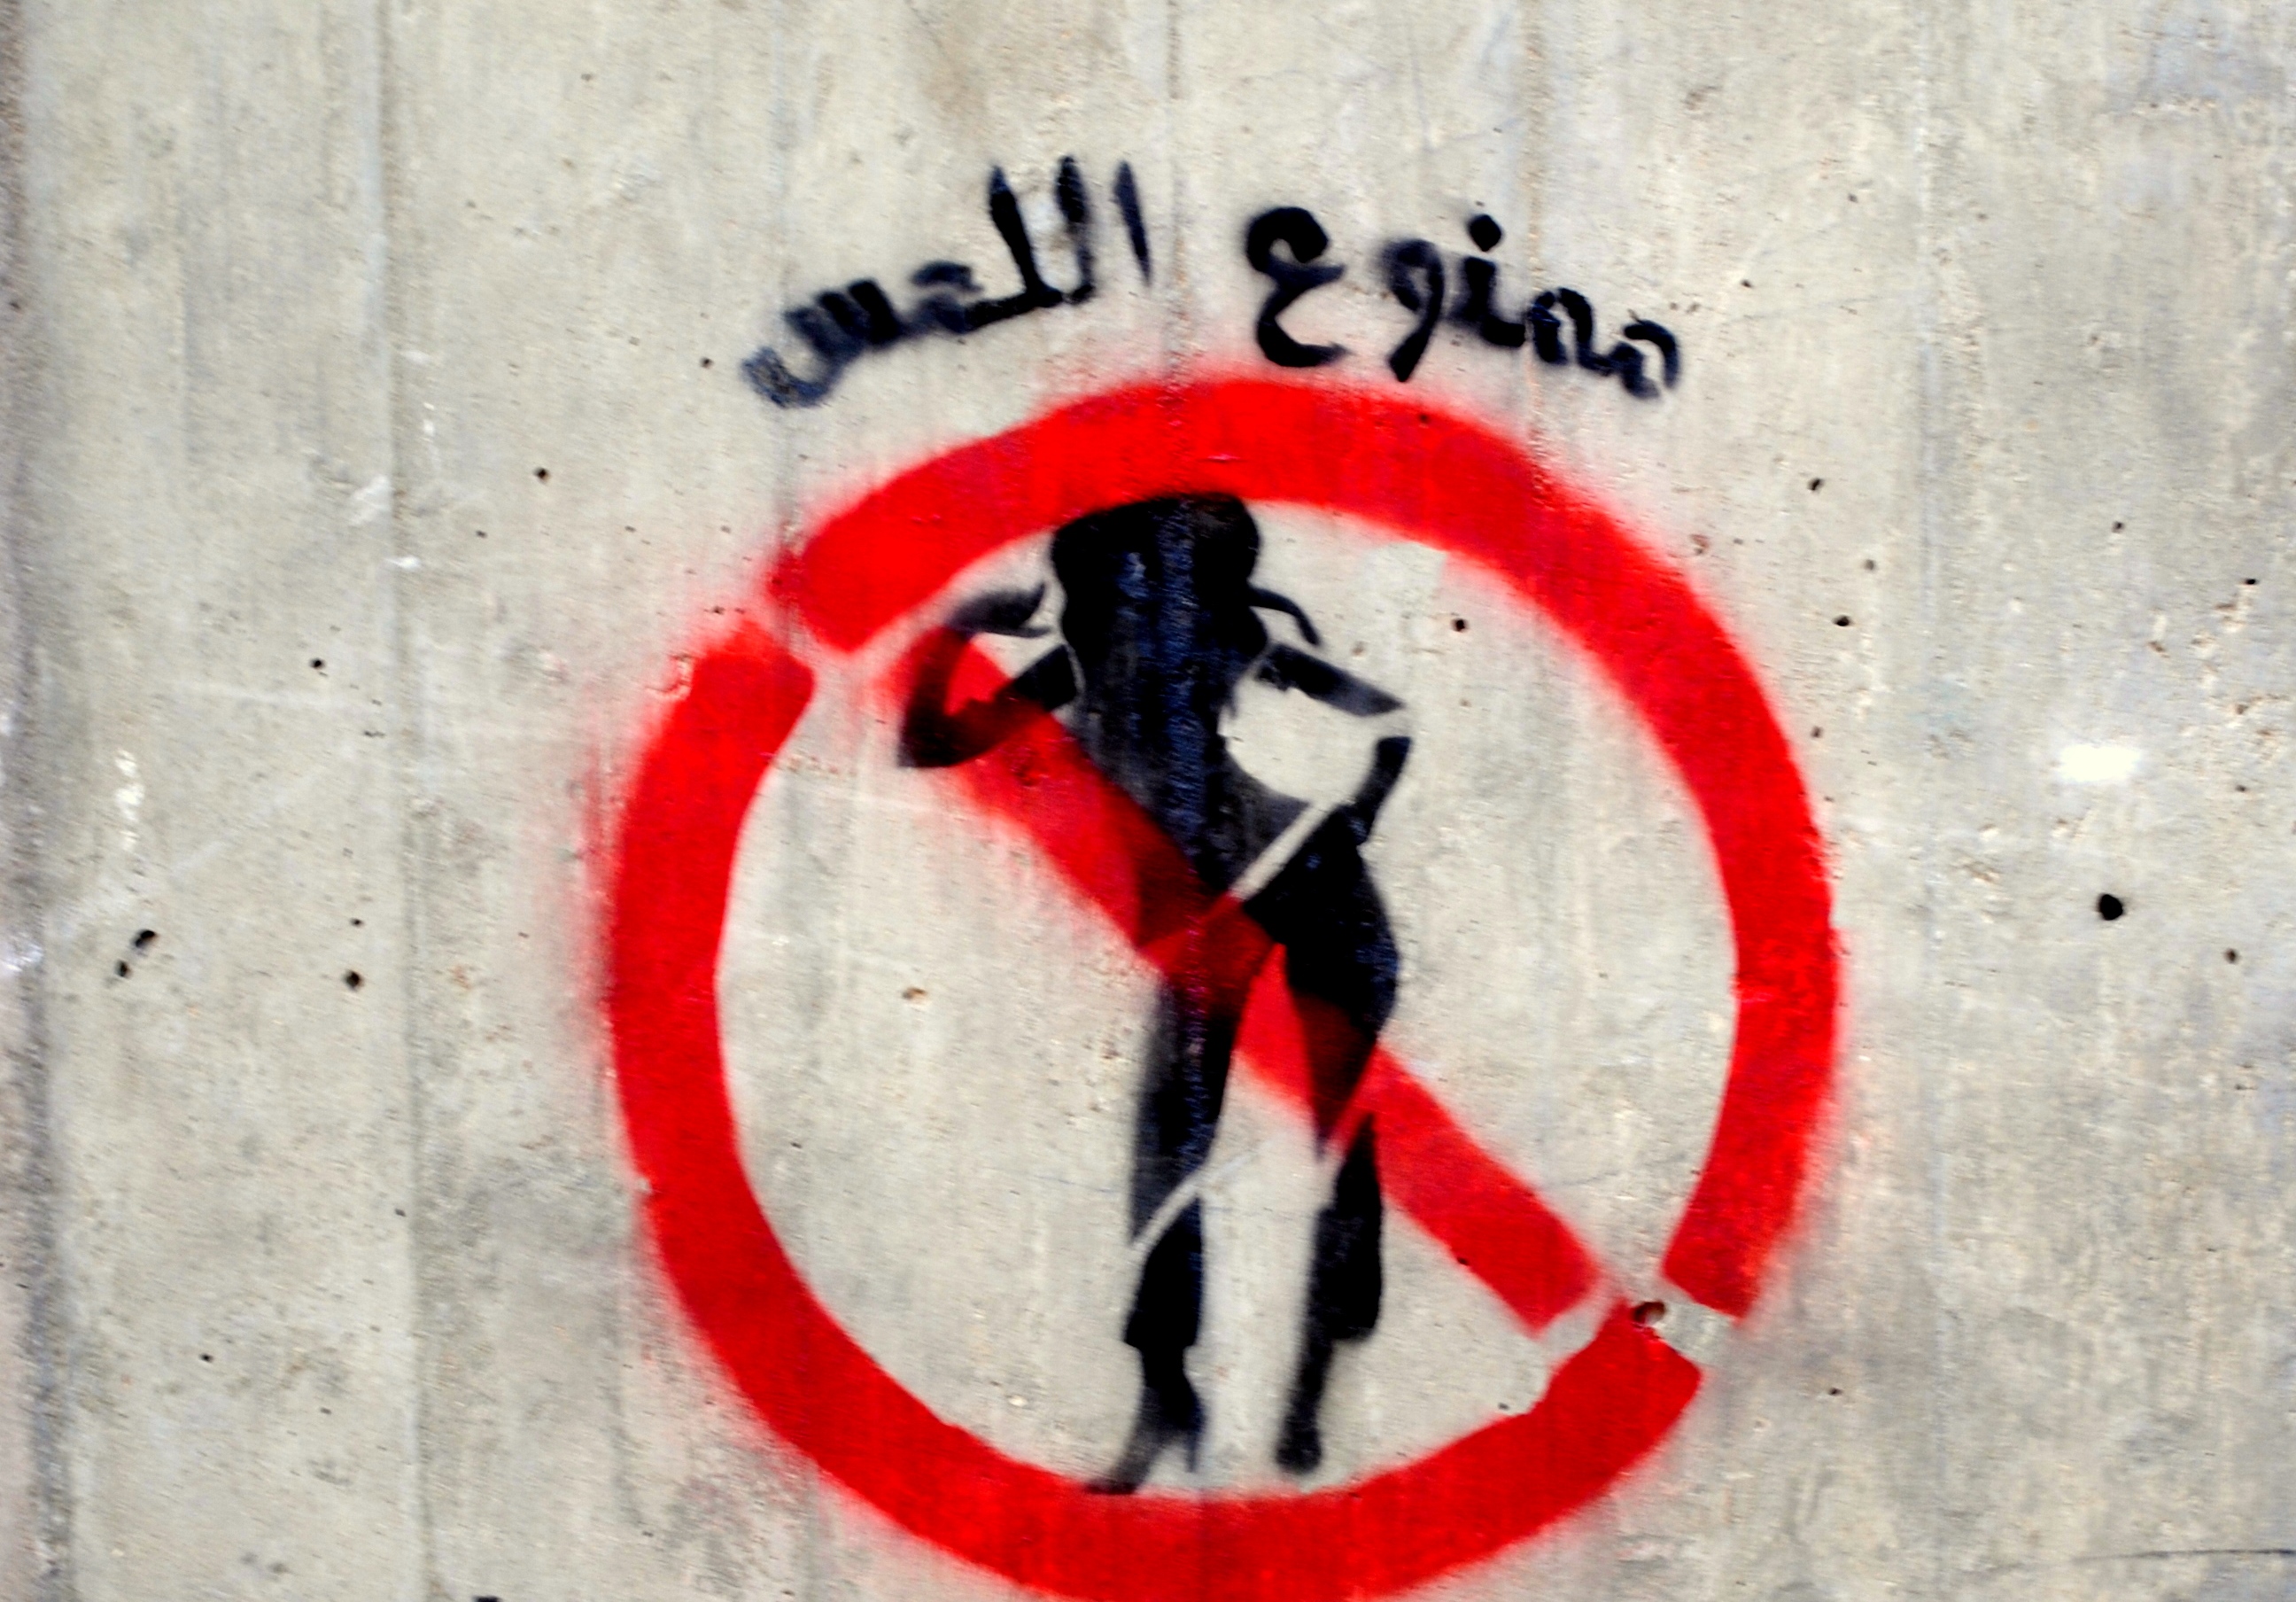 Machoism and the Hatred of Women: Egypt's Rape Culture